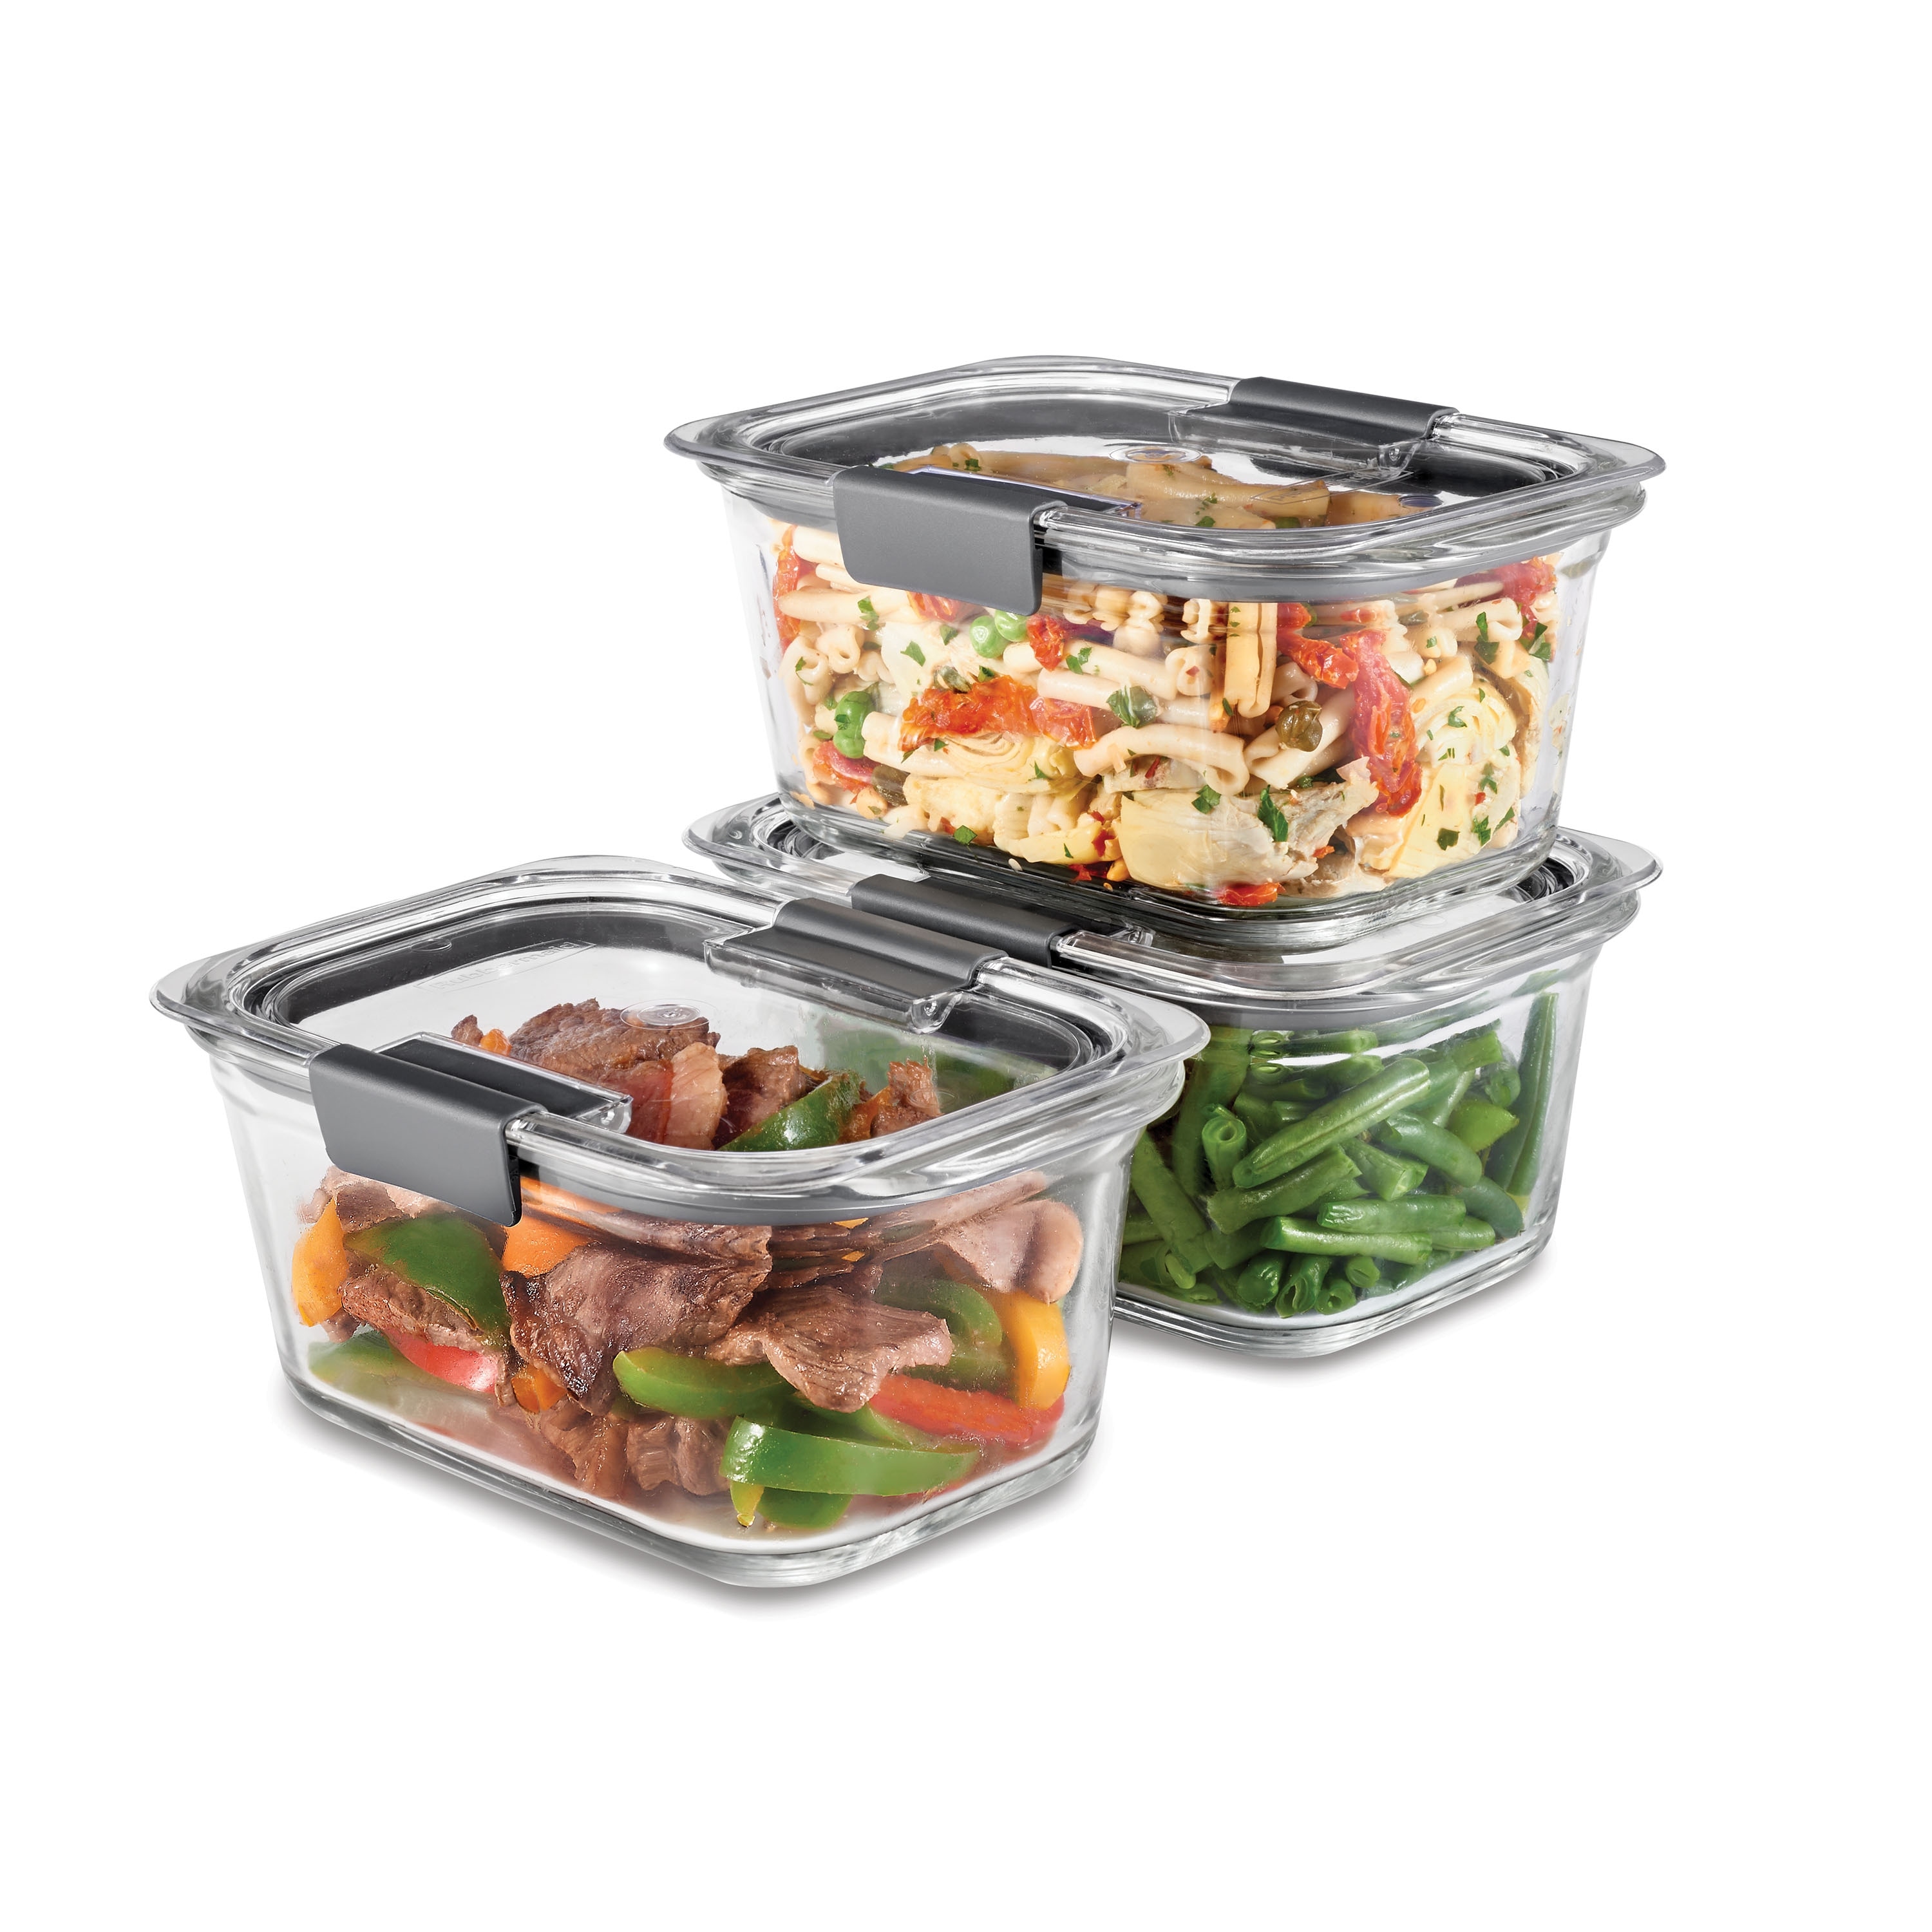 Rubbermaid Brilliance Glass Food Storage Containers, 4.7 Cup Food Containers with Lids, 3 Pack (6 Pieces Total)